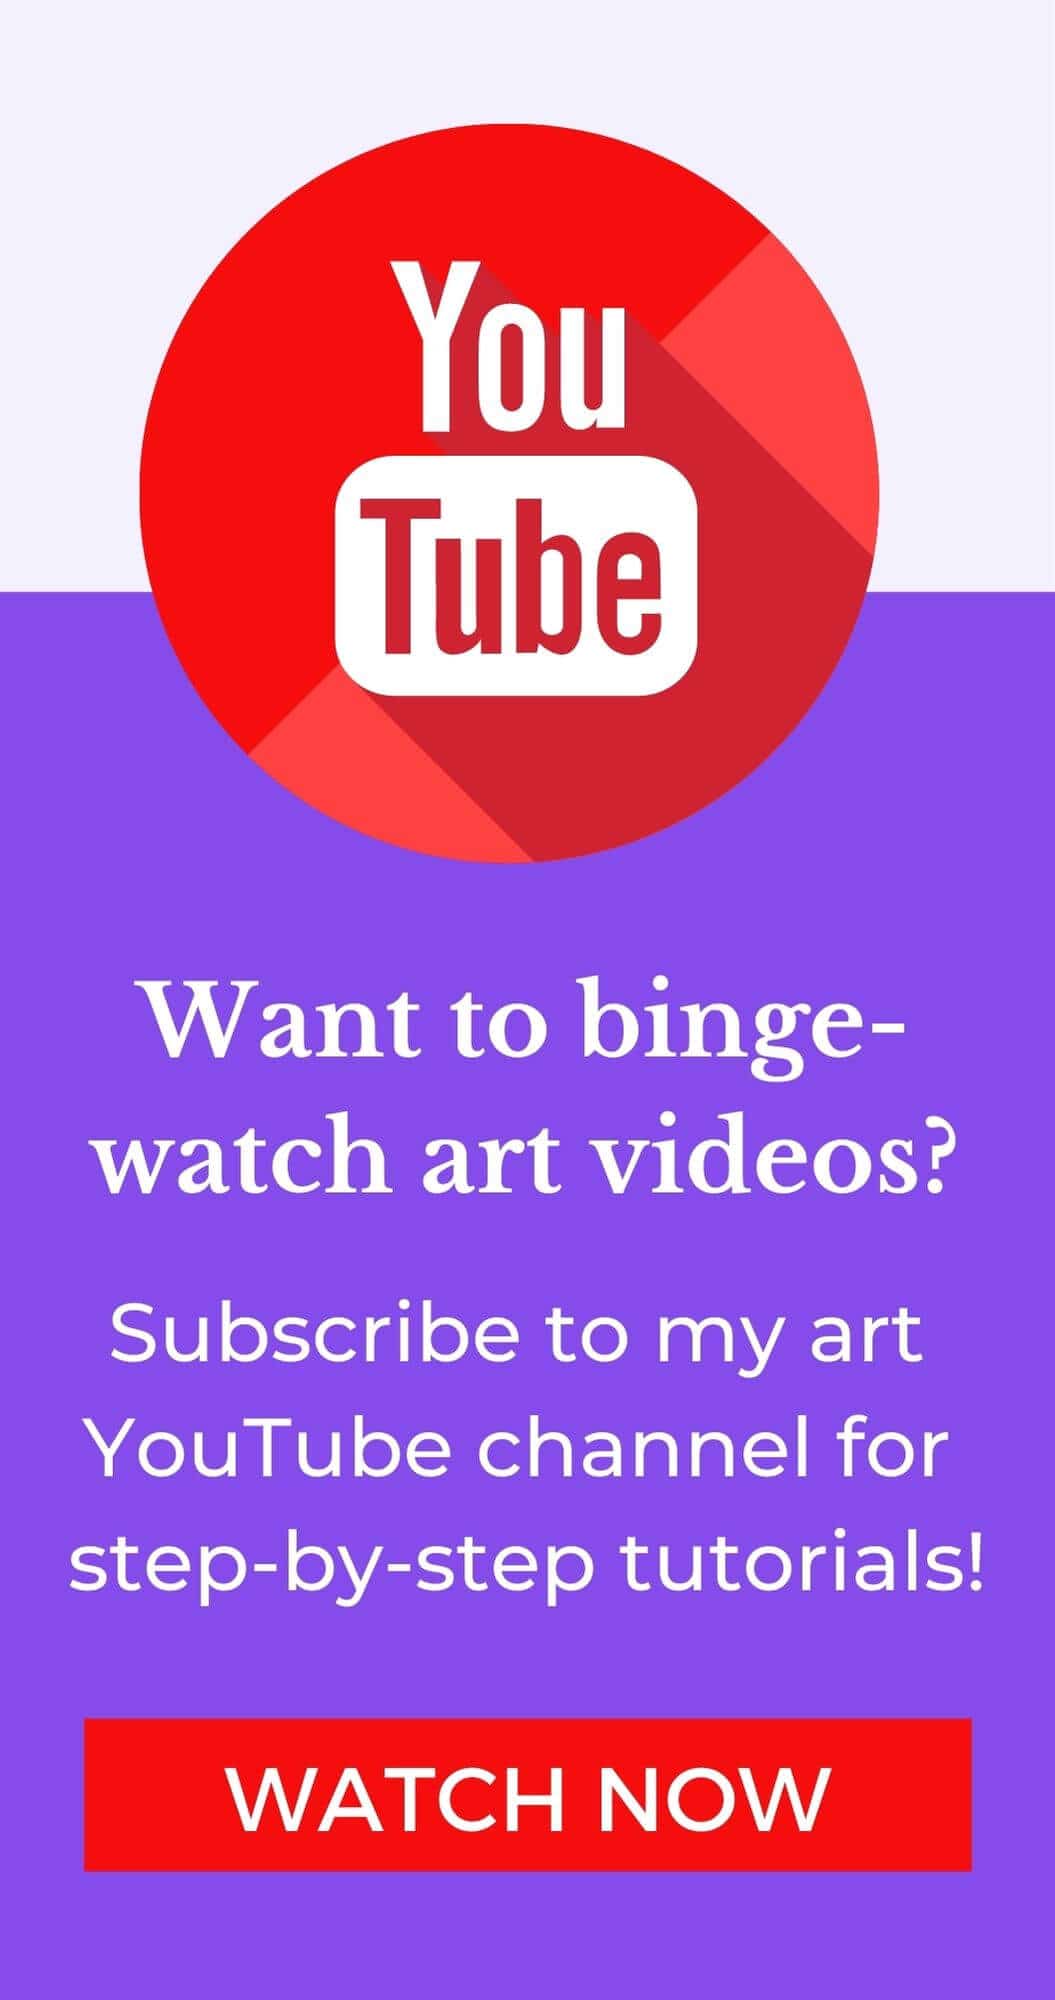 Subscribe to Miranda Balogh's art channel on YouTube to watch free watercolour tutorials, get drawing and sketching tips, and get tons of art advice to make you a better artist.